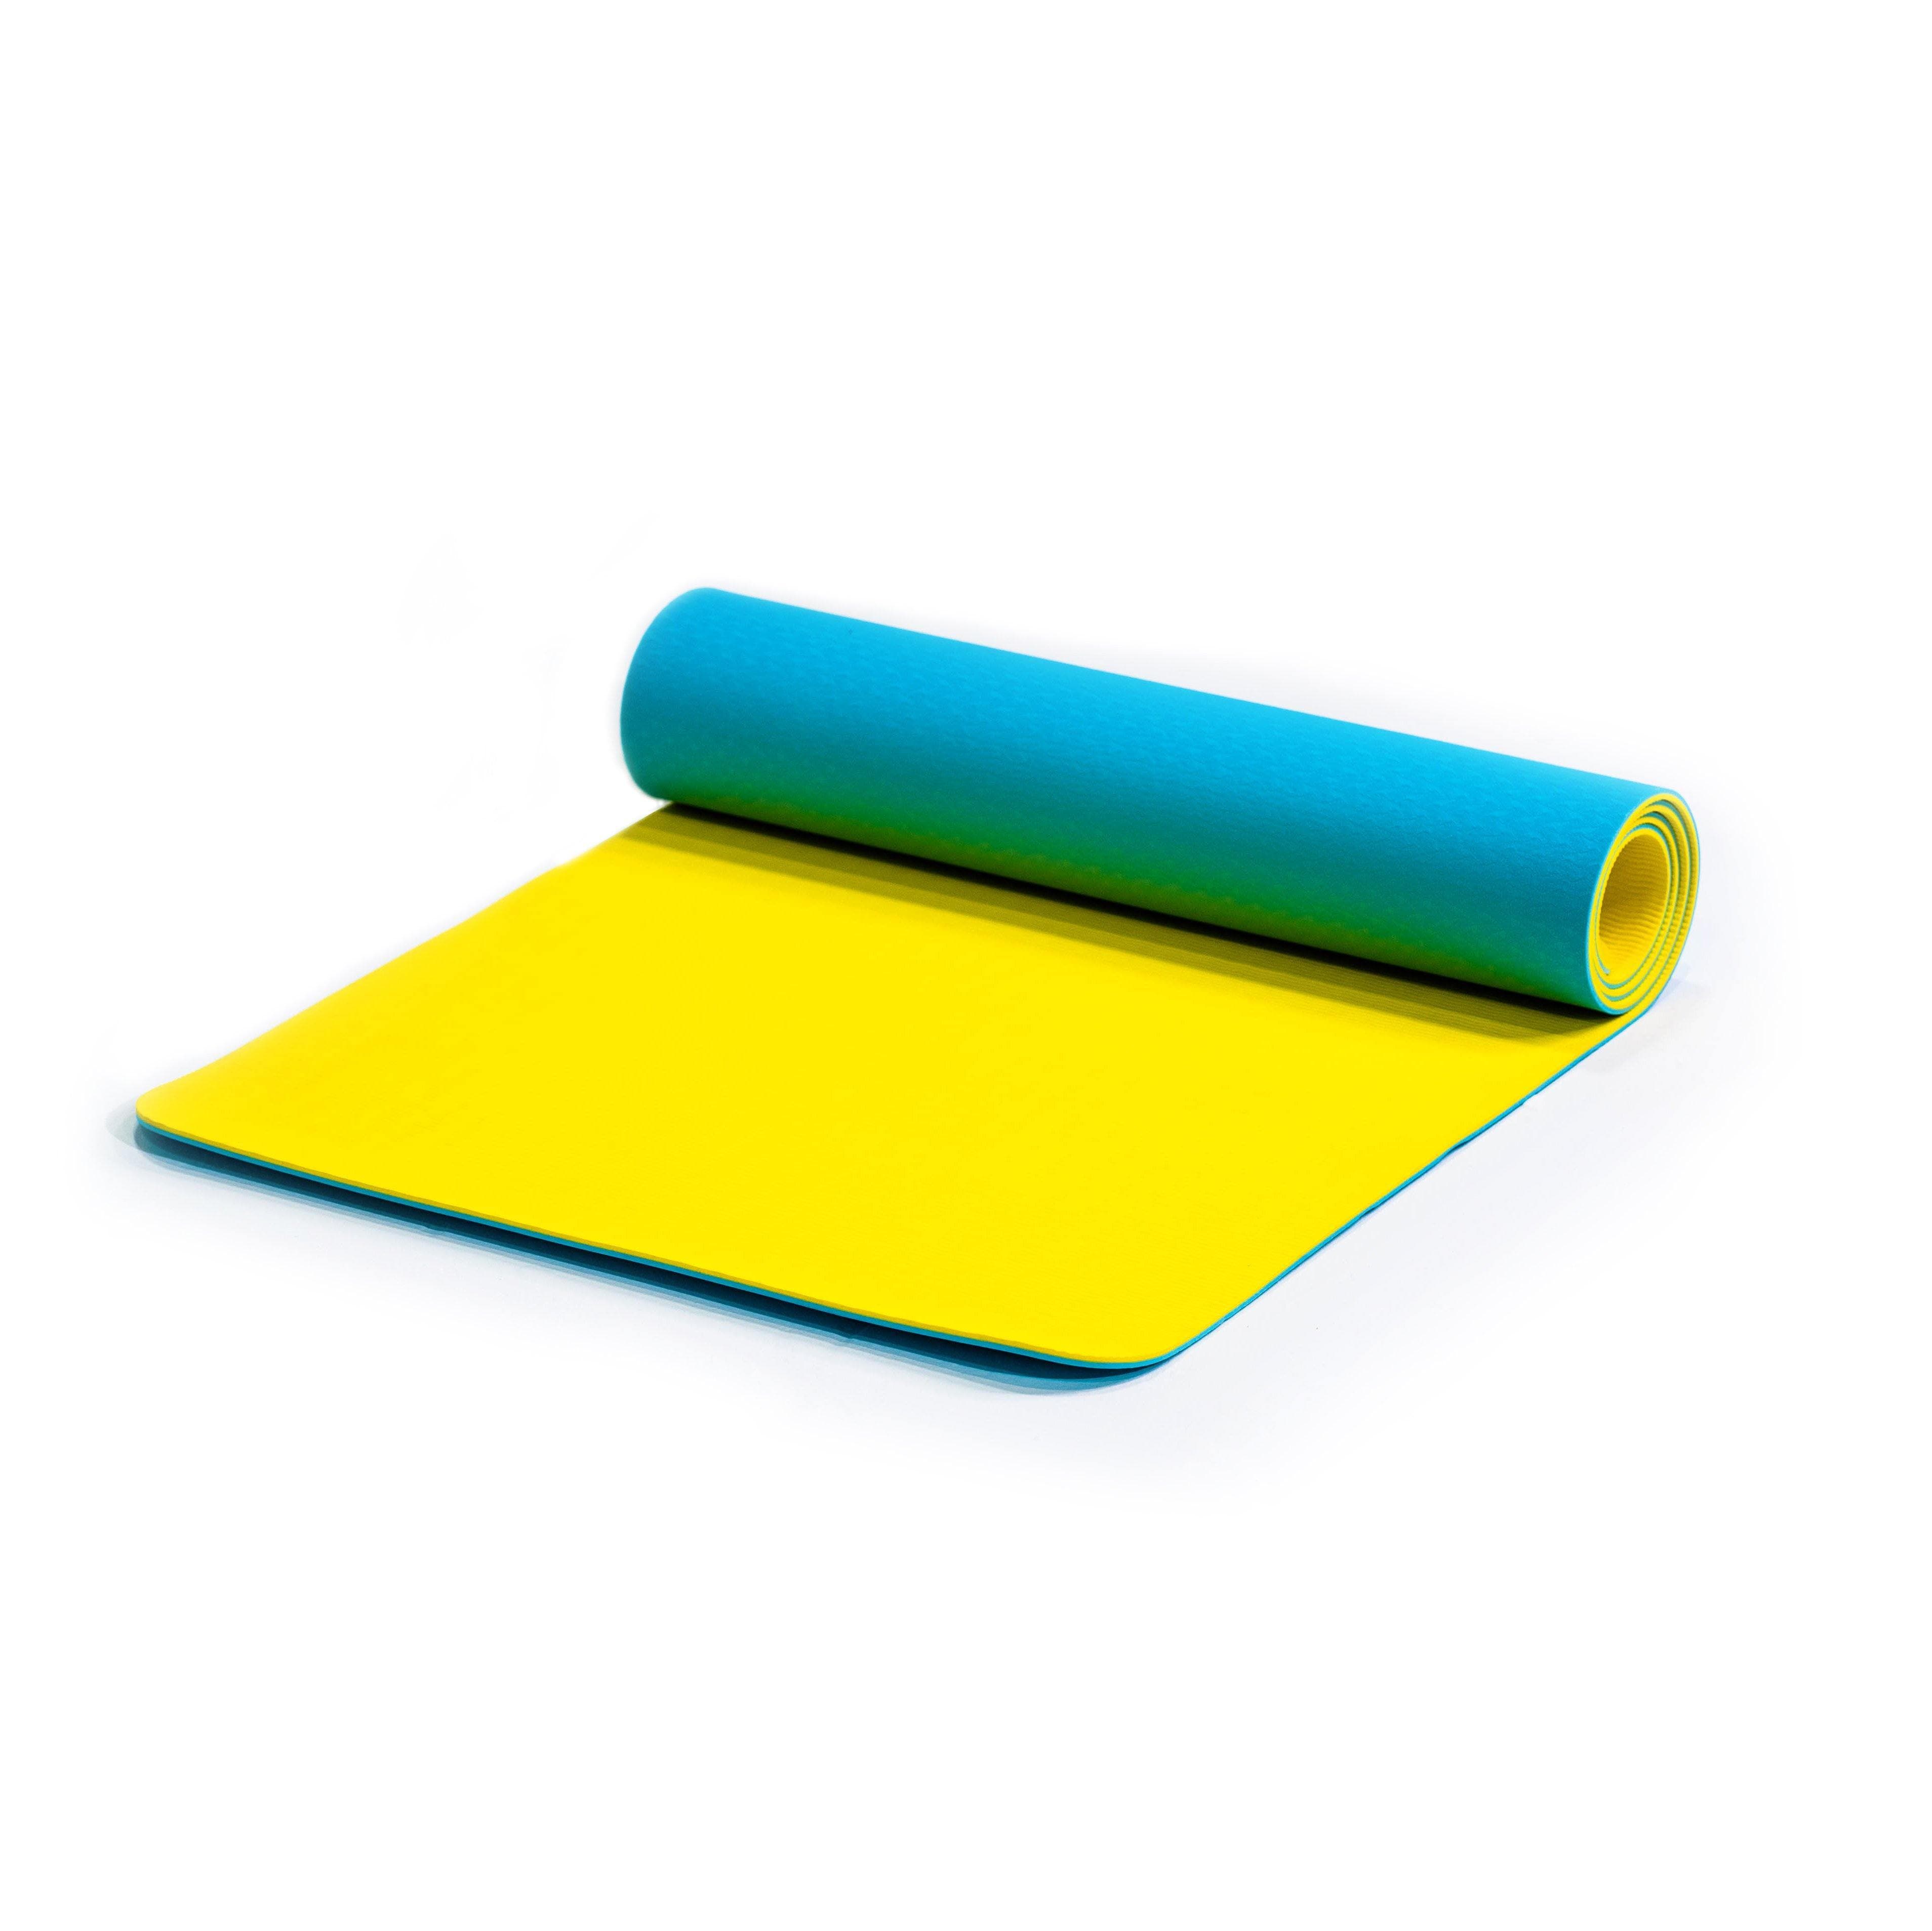 The perfect at-home or on-the-go workout accessory, the Redge Workout Mat is an eco-friendly mat, designed with double-layer anti-tear, non-slip texture, cushioning, and resilience. This extra-large mat is perfect for any type of exercise! Available at https://www.getredge.com/products/redge-double-sided-workout-mat